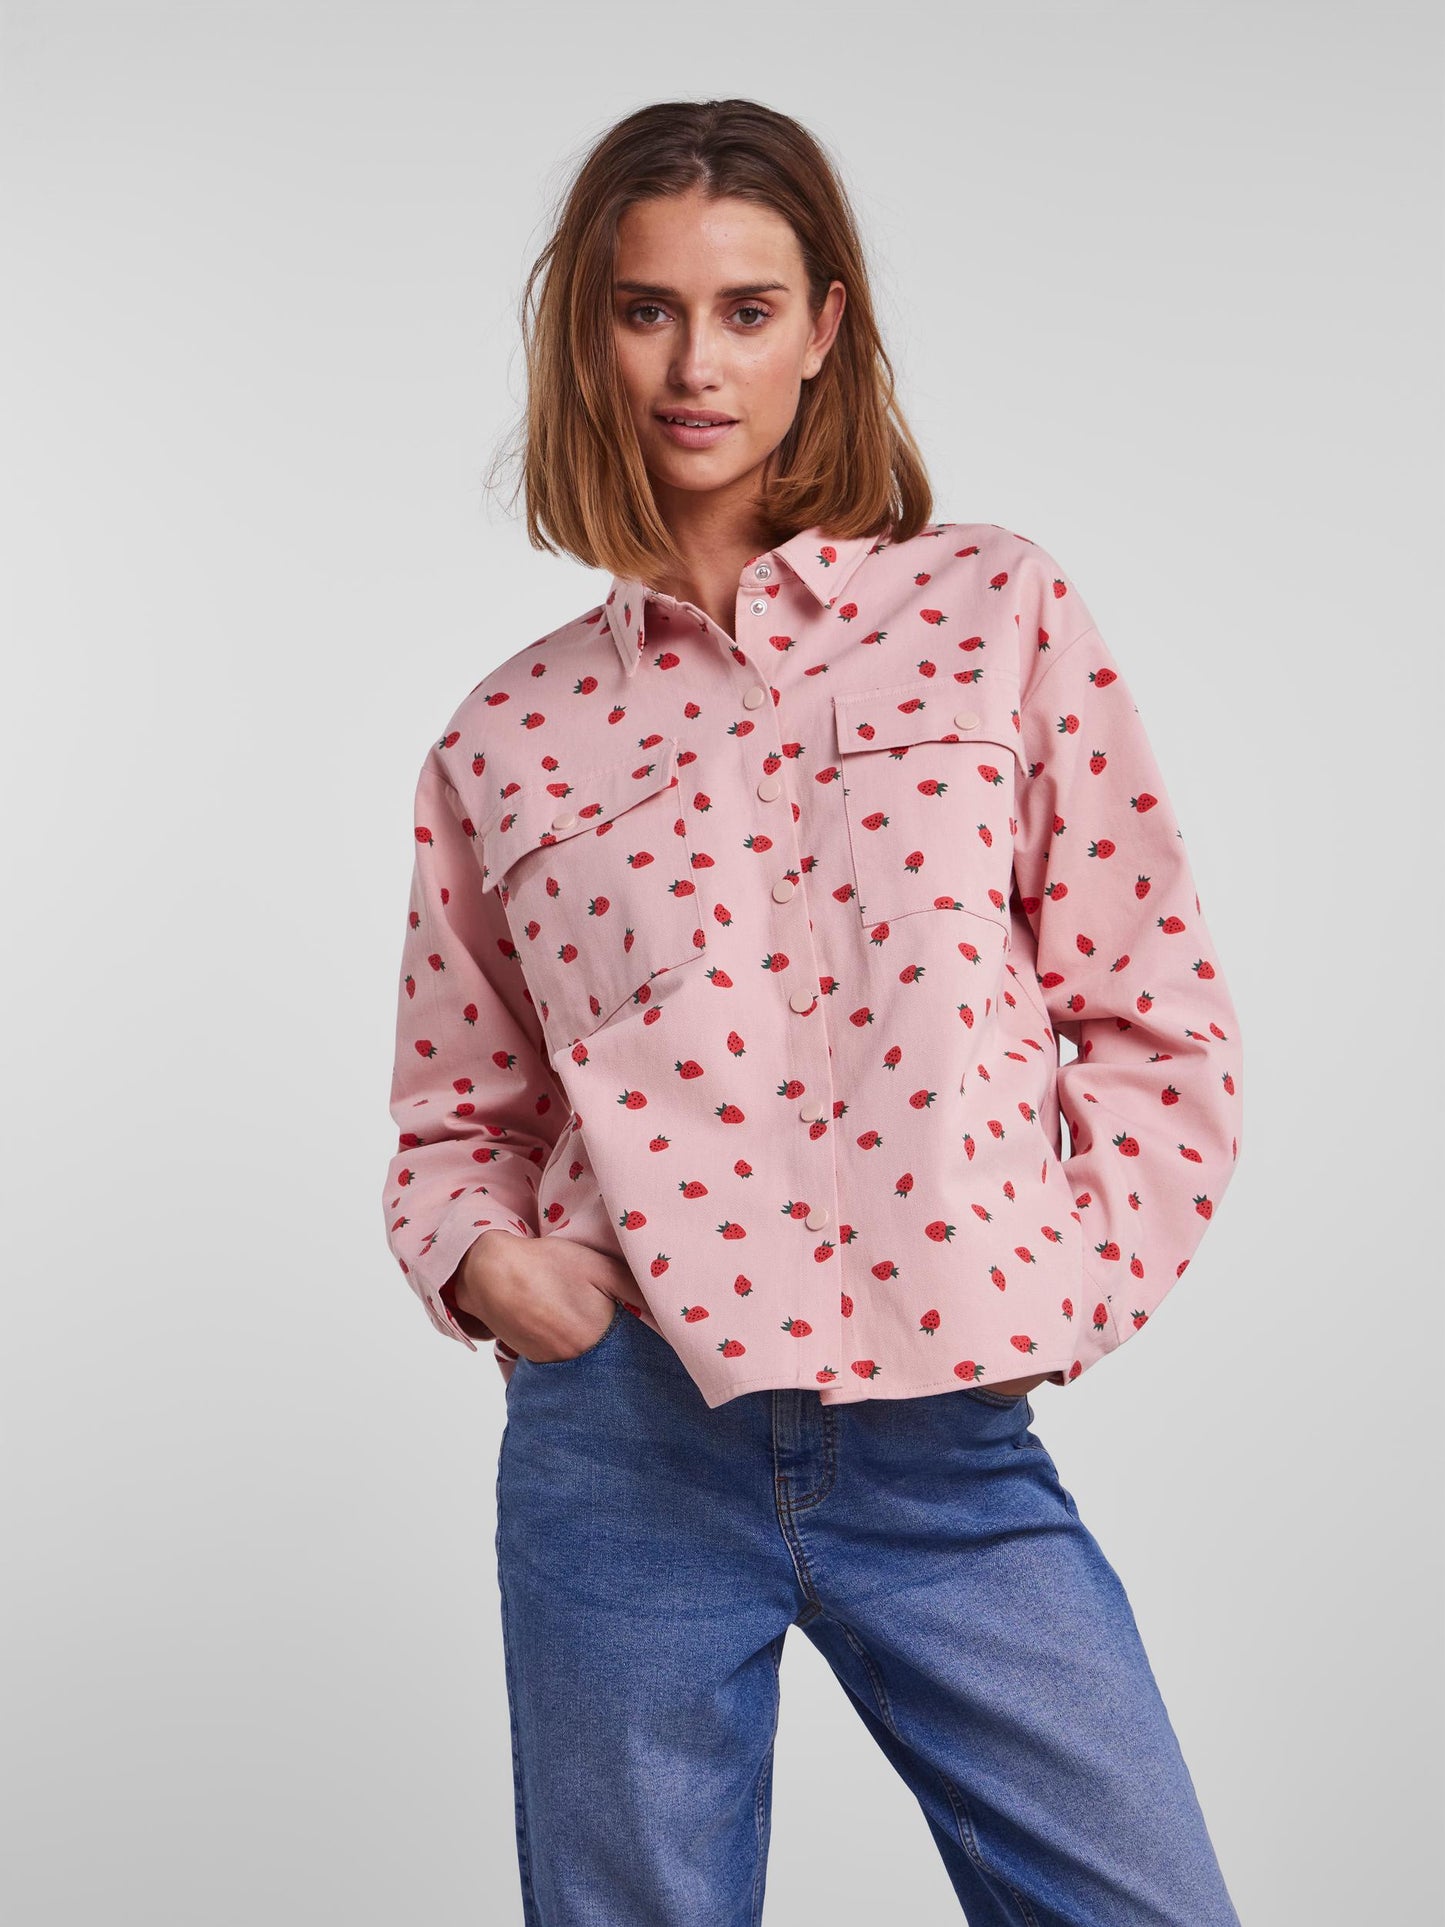 Pieces - Baby Pink Strawberry Printed Shirt